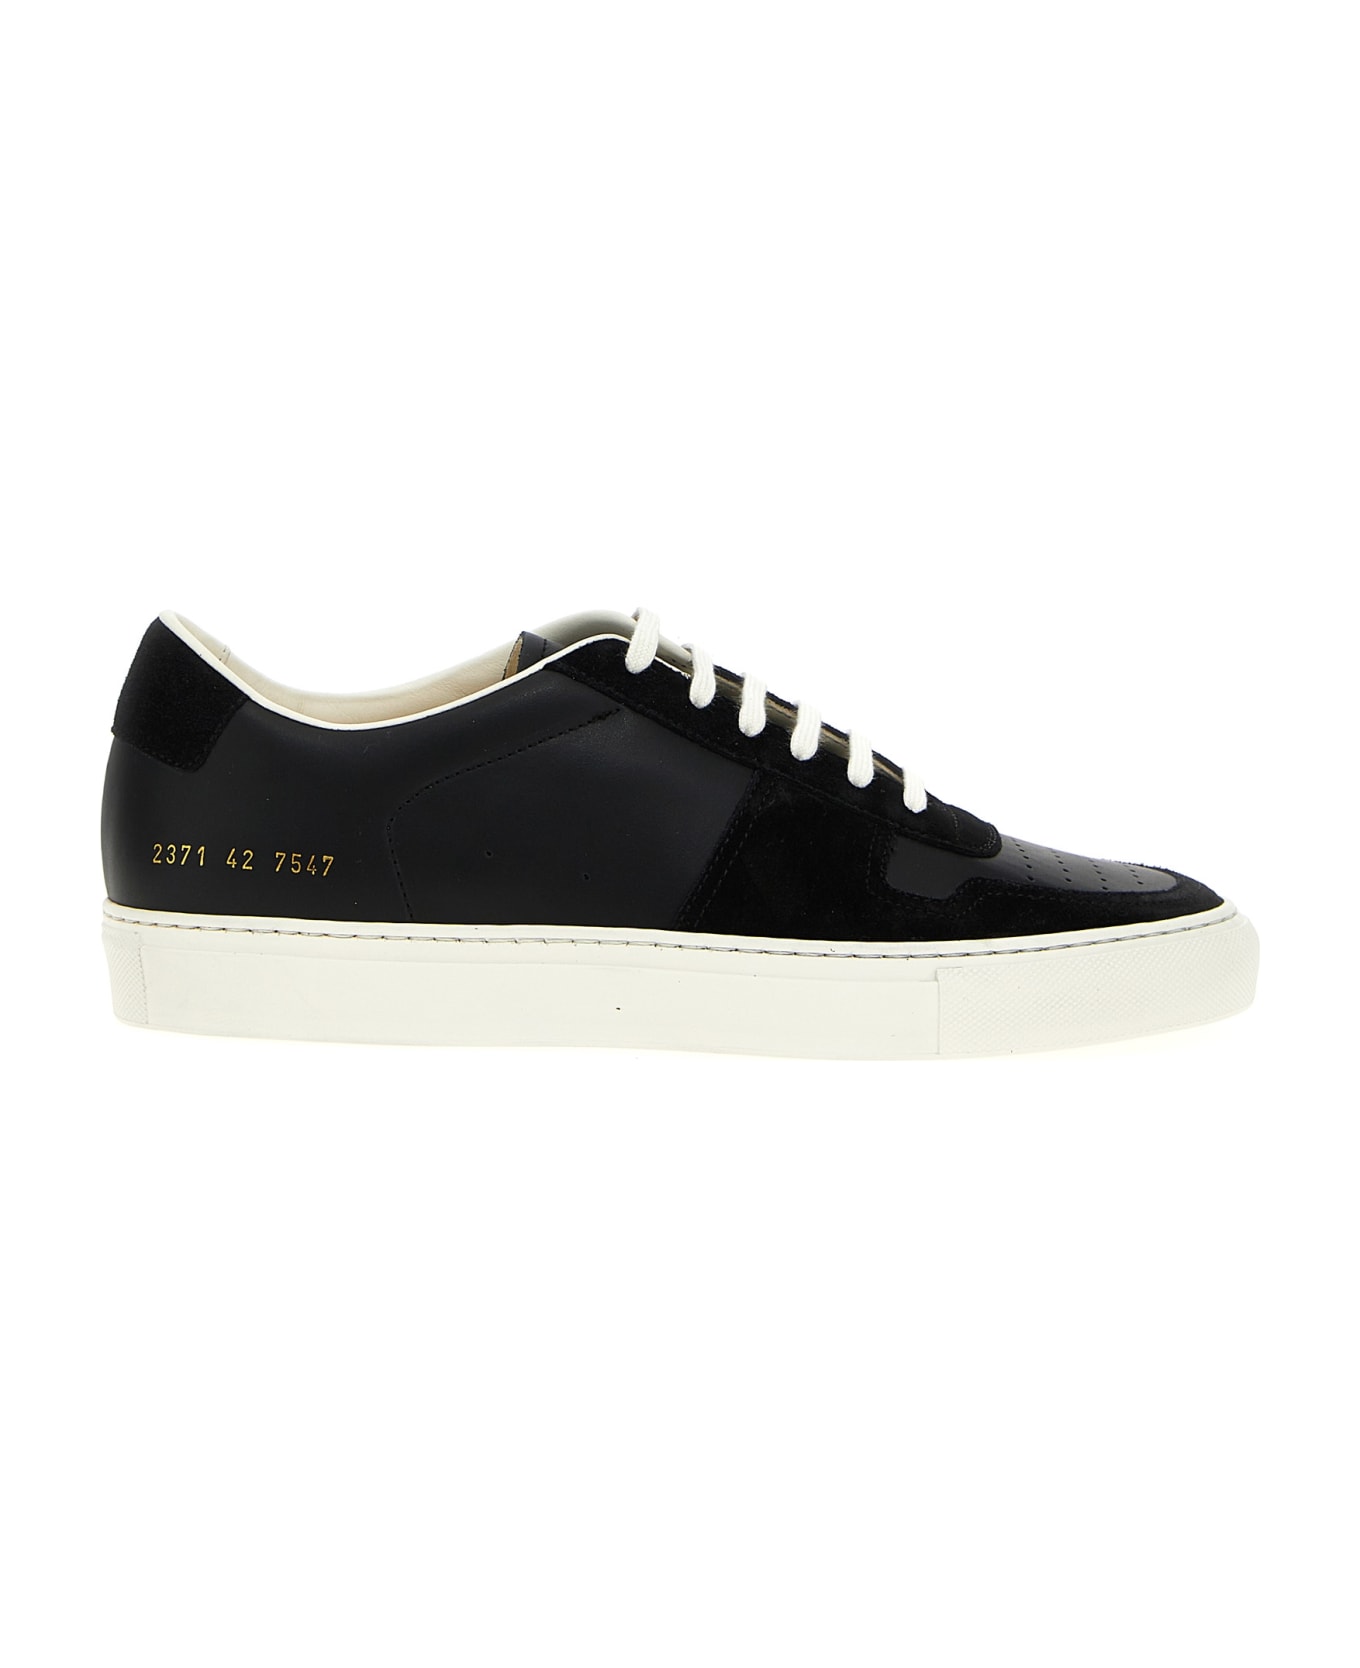 Common Projects Sneakers Bball Low - White/Black スニーカー